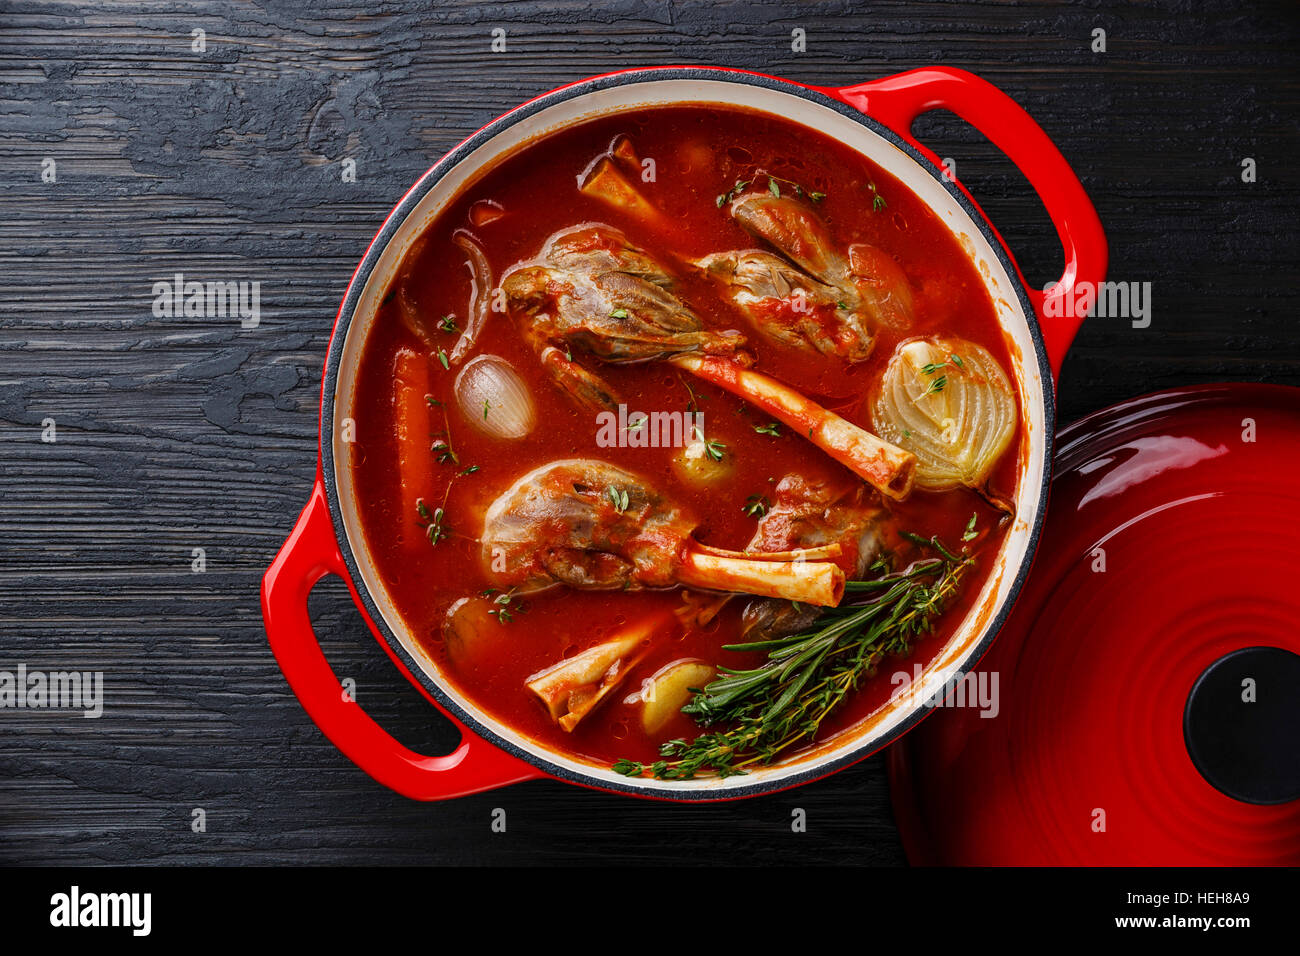 Stewed lamb on bone stewed in tomato sauce in cast iron pot on burned black wooden background Stock Photo